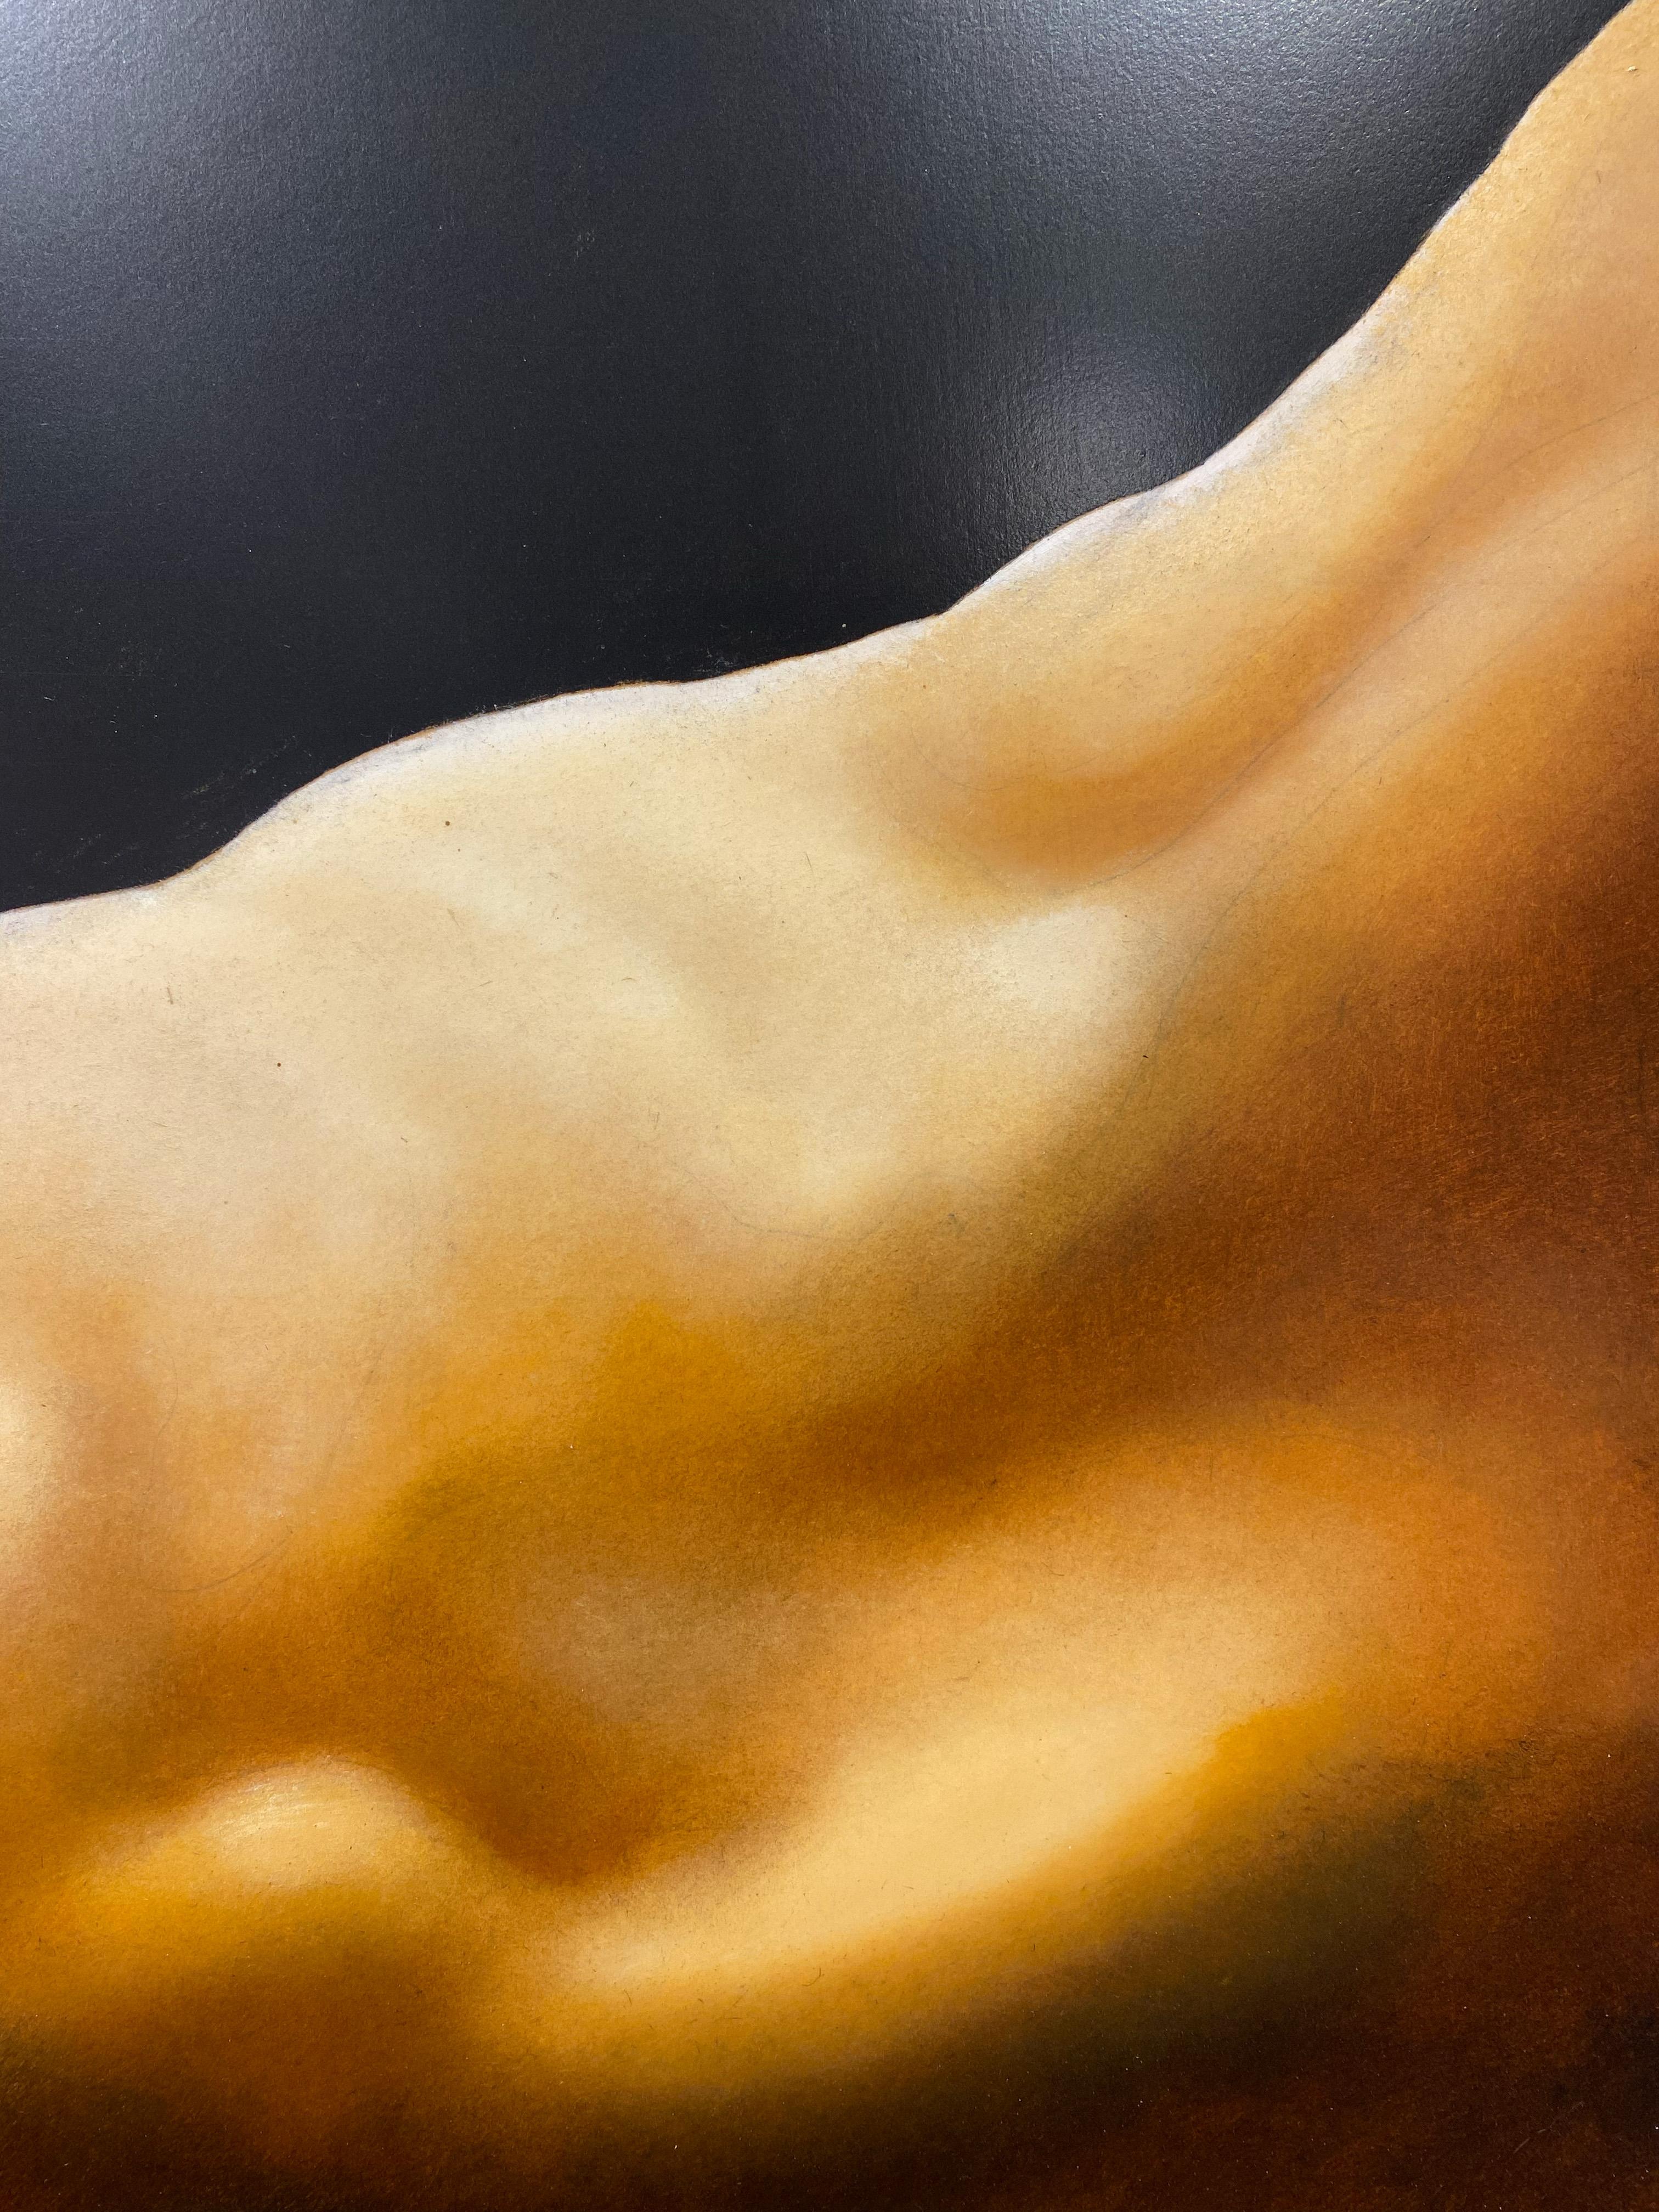 Landscape of Man - Close-Up Nude Male Body Lying Down, Original, Oil on Panel For Sale 1